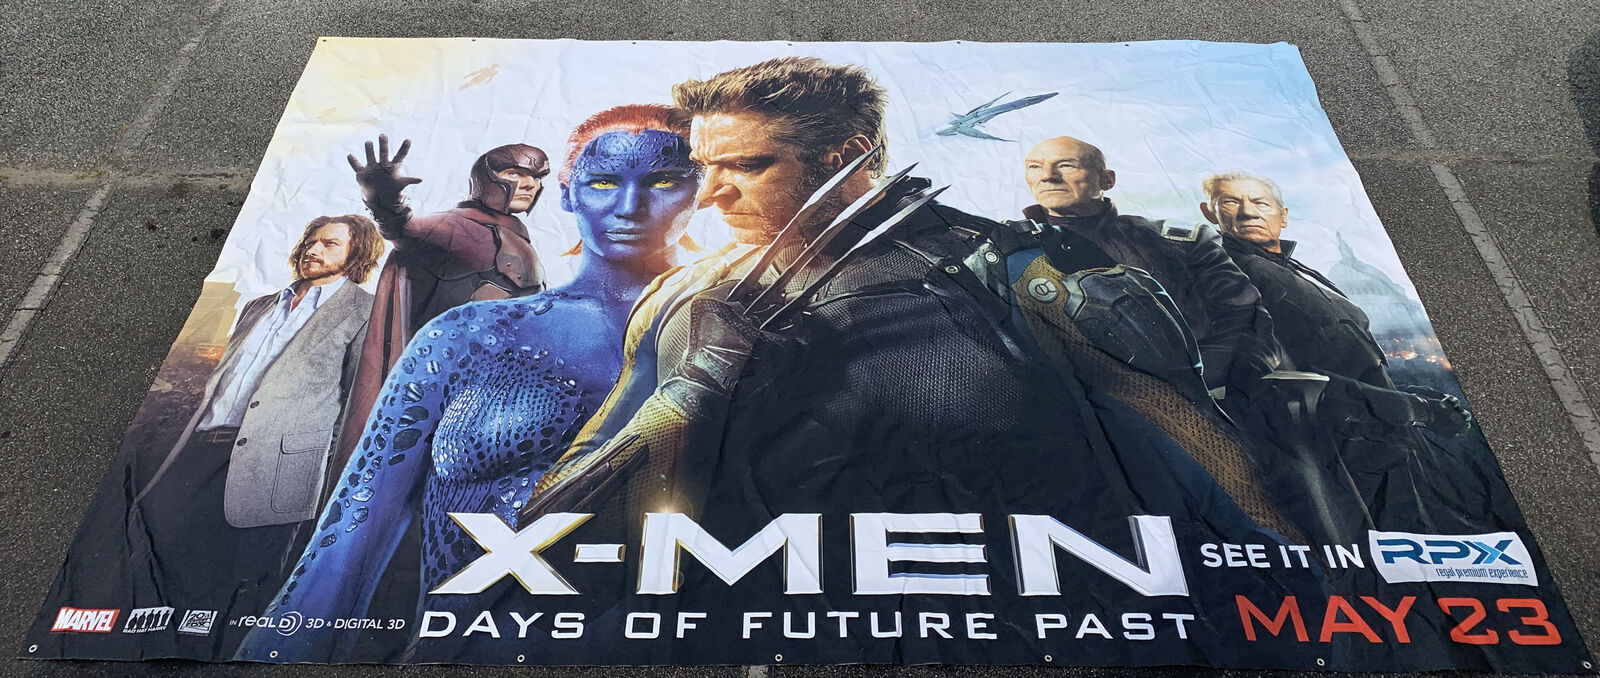 WALL SIZED vinyl banner/poster promo ~2014 X-MEN DAYS OF FUTURE PAST~ 10x15 feet